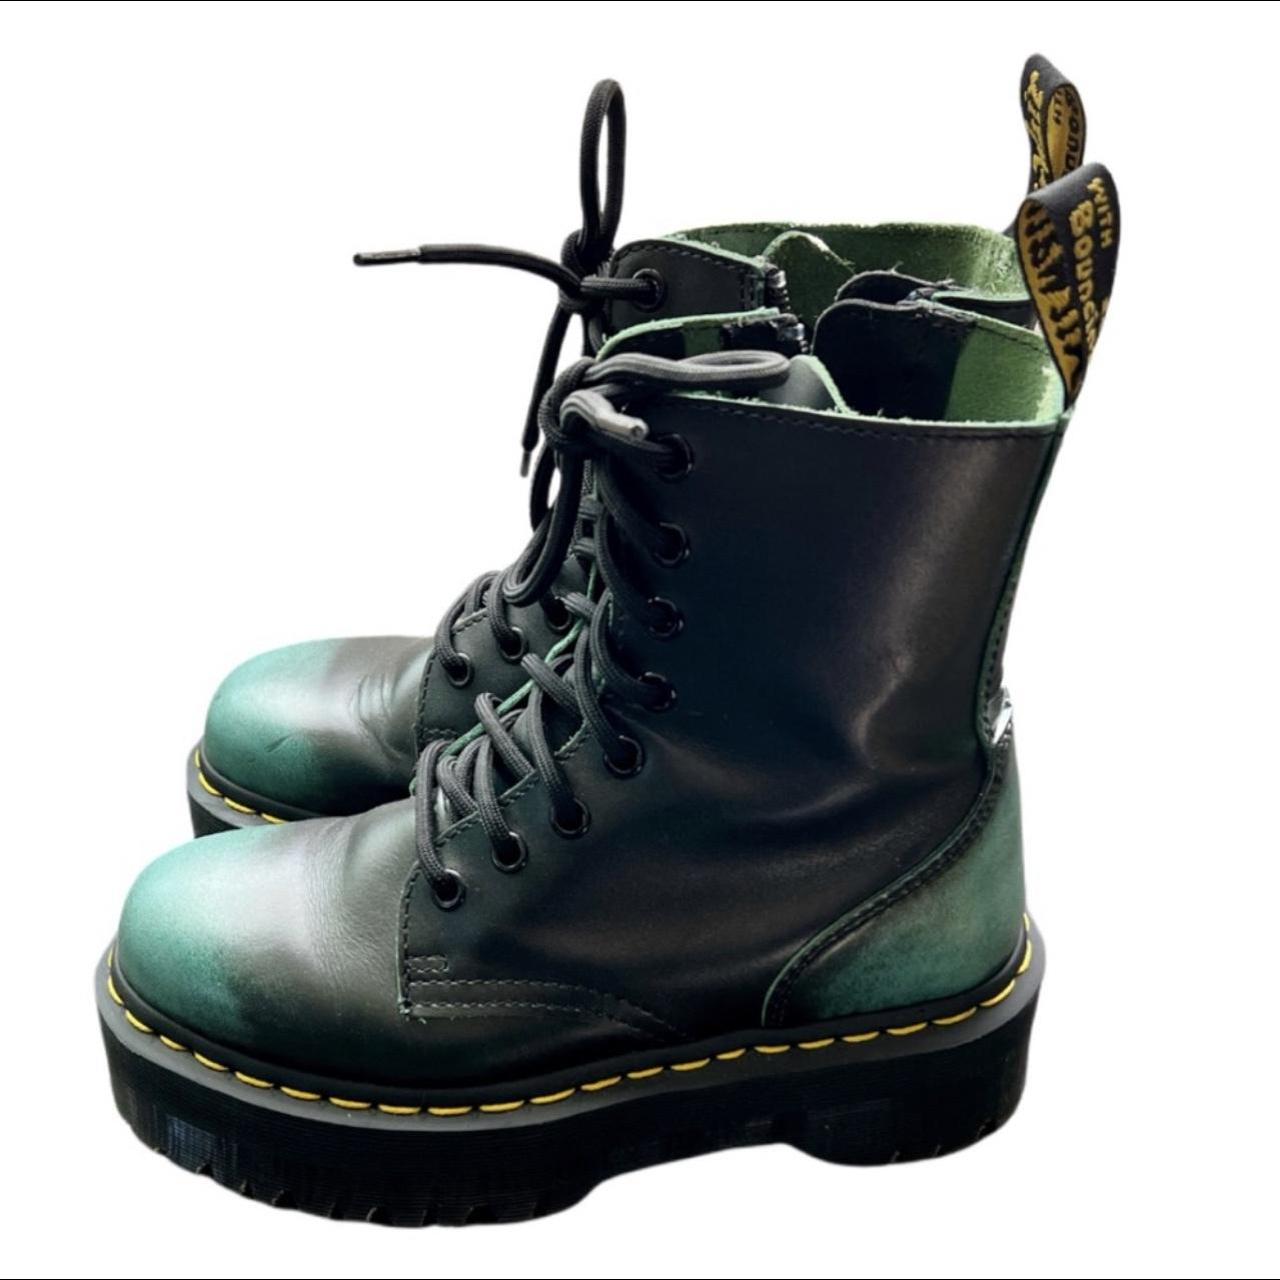 Dr. Martens Women's Green and Black Boots